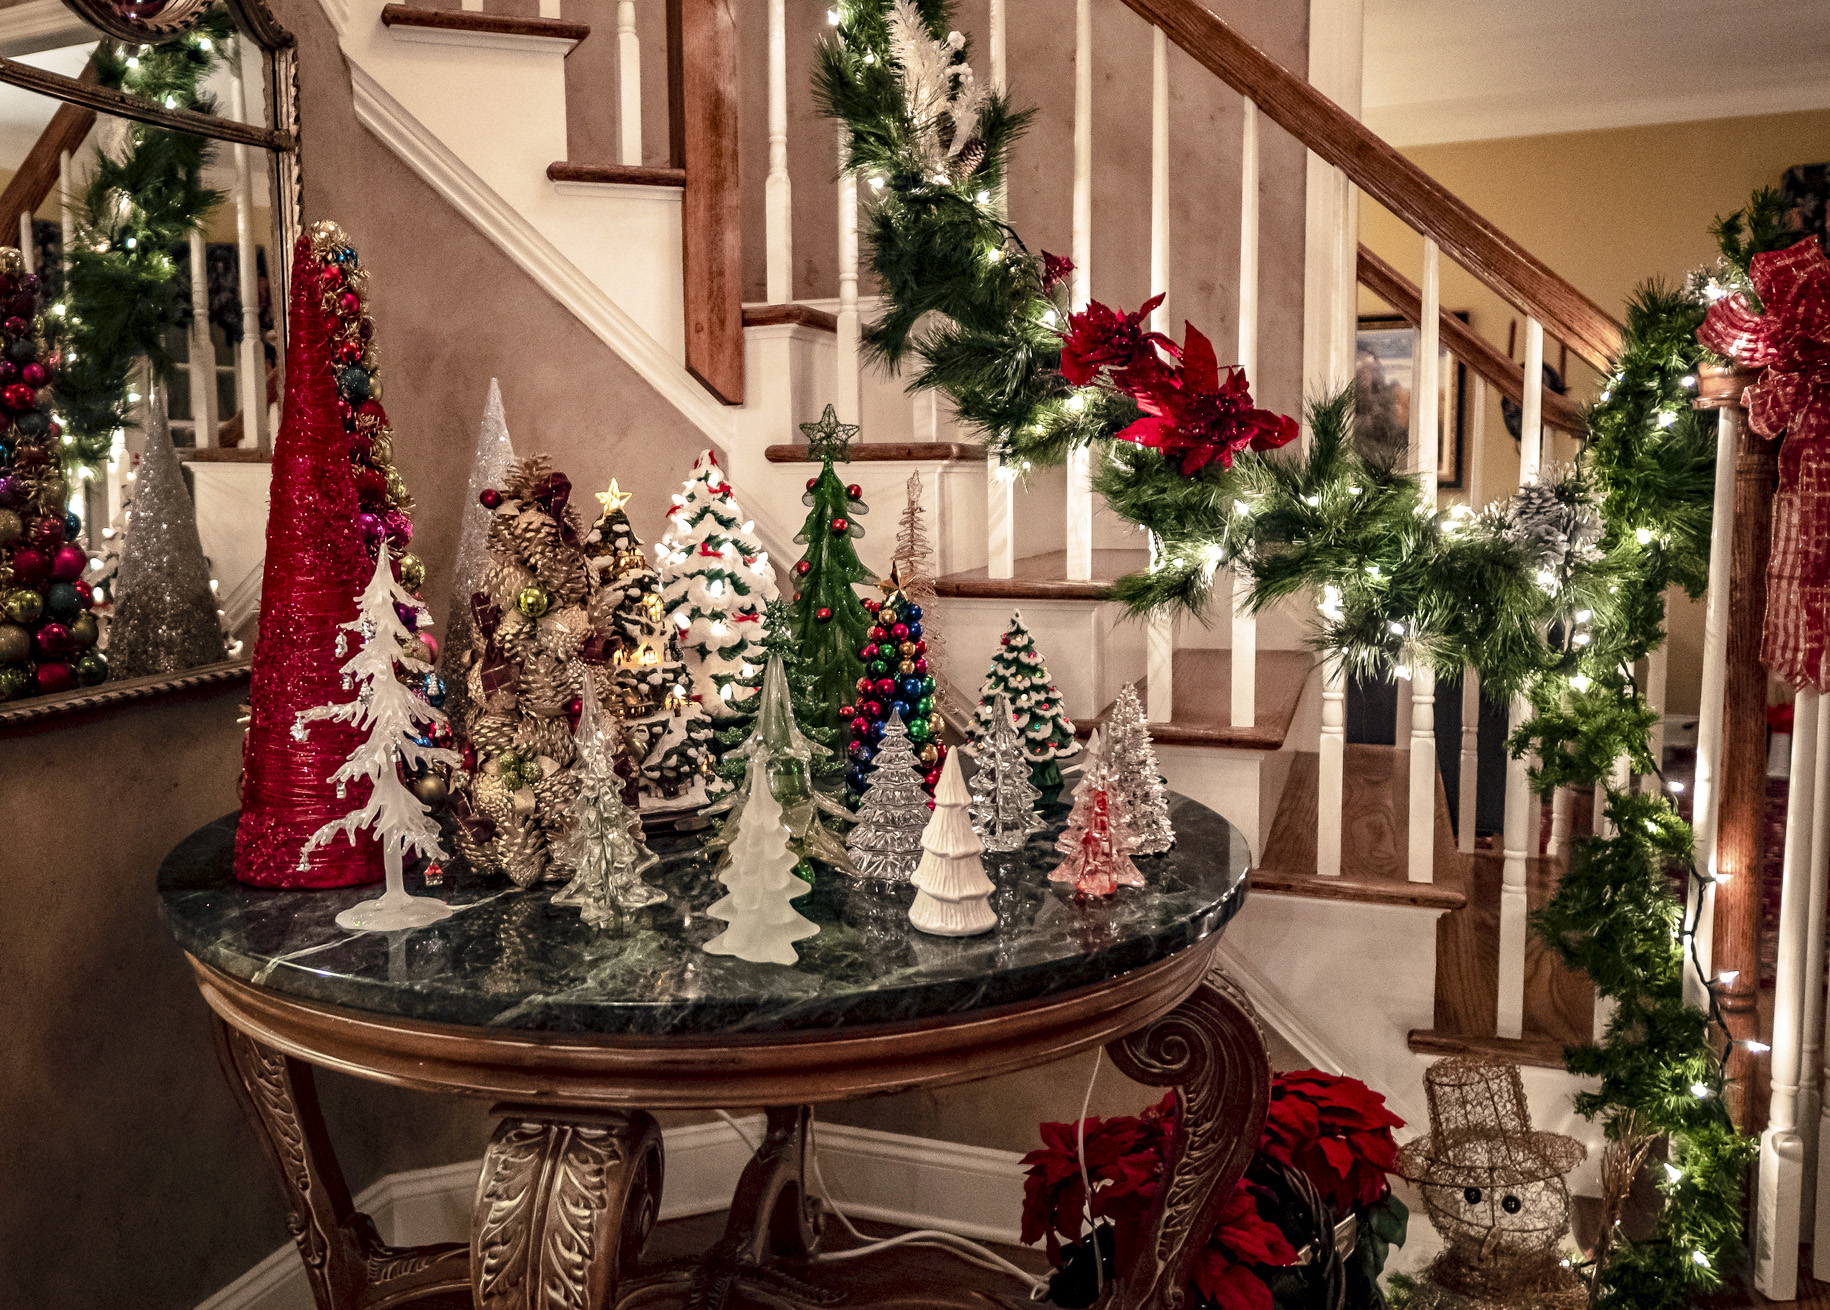 Different types of ornaments may require different storage conditions.